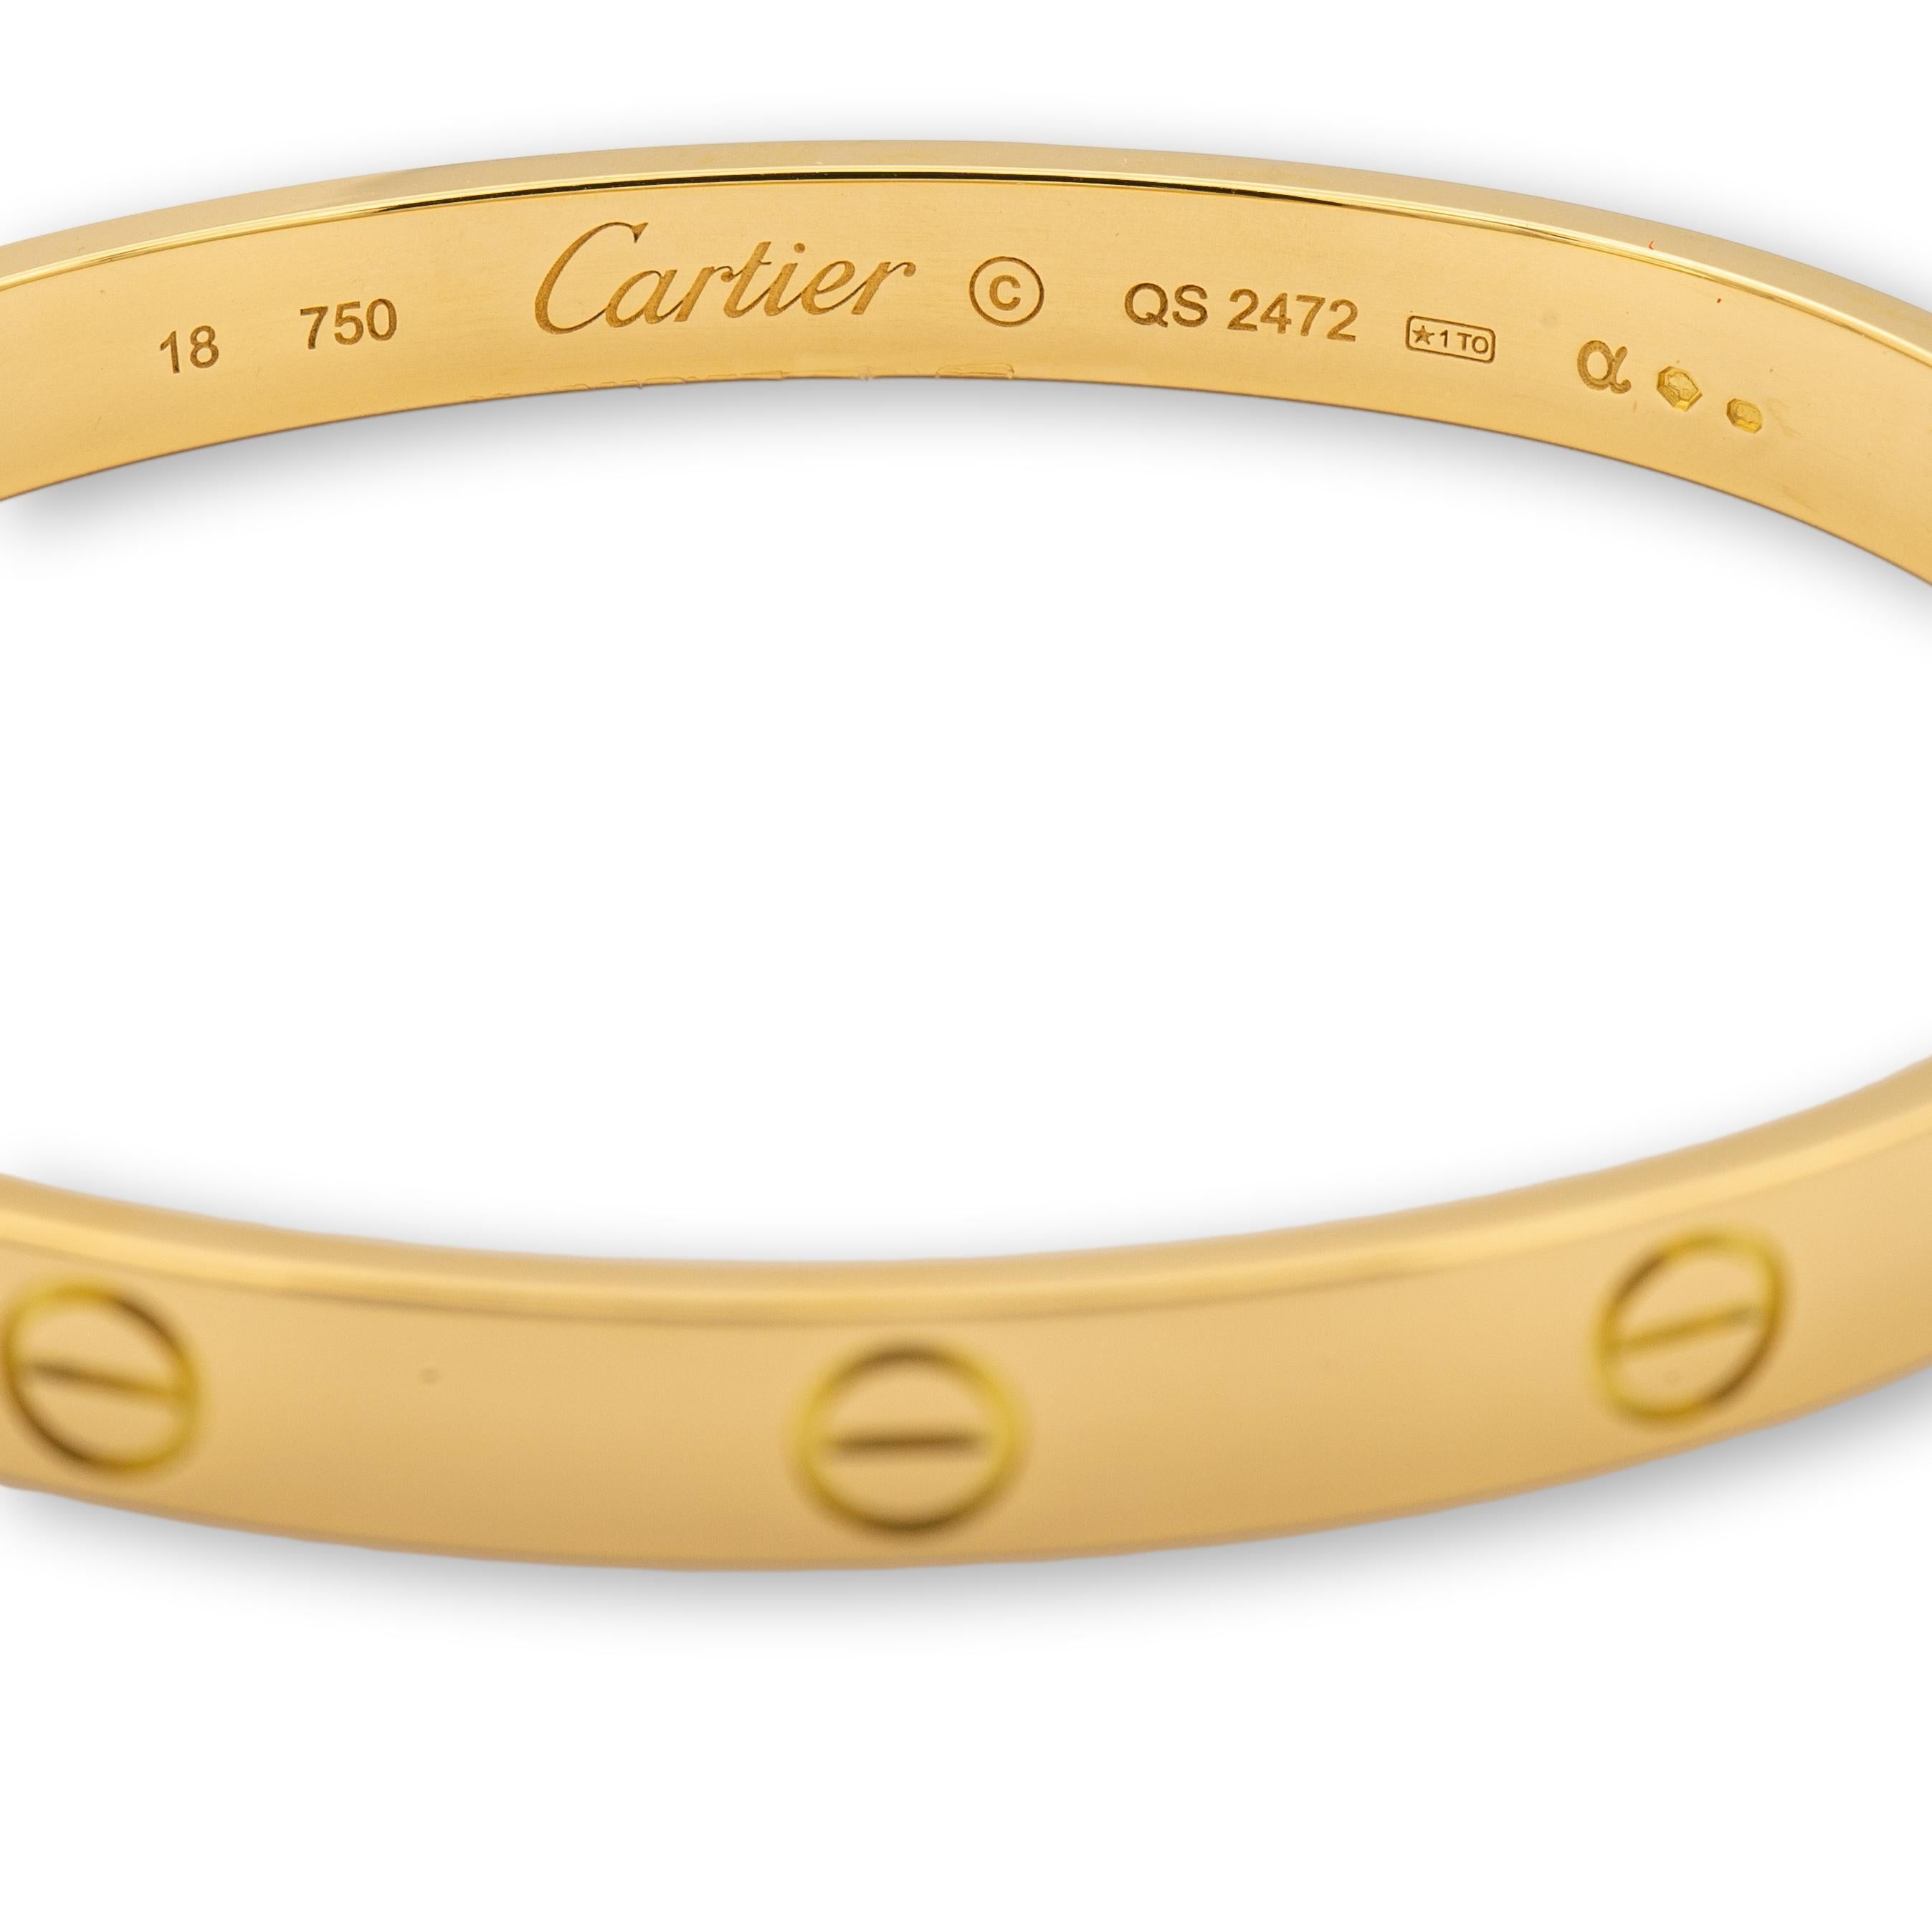 Cartier bangle bracelet from the iconic Love collection finely crafted in 18 karat yellow gold featuring screw motifs all the way around in a size 17. The closure is designed with two screws placed on either side of the bracelet.  Bracelet is fully